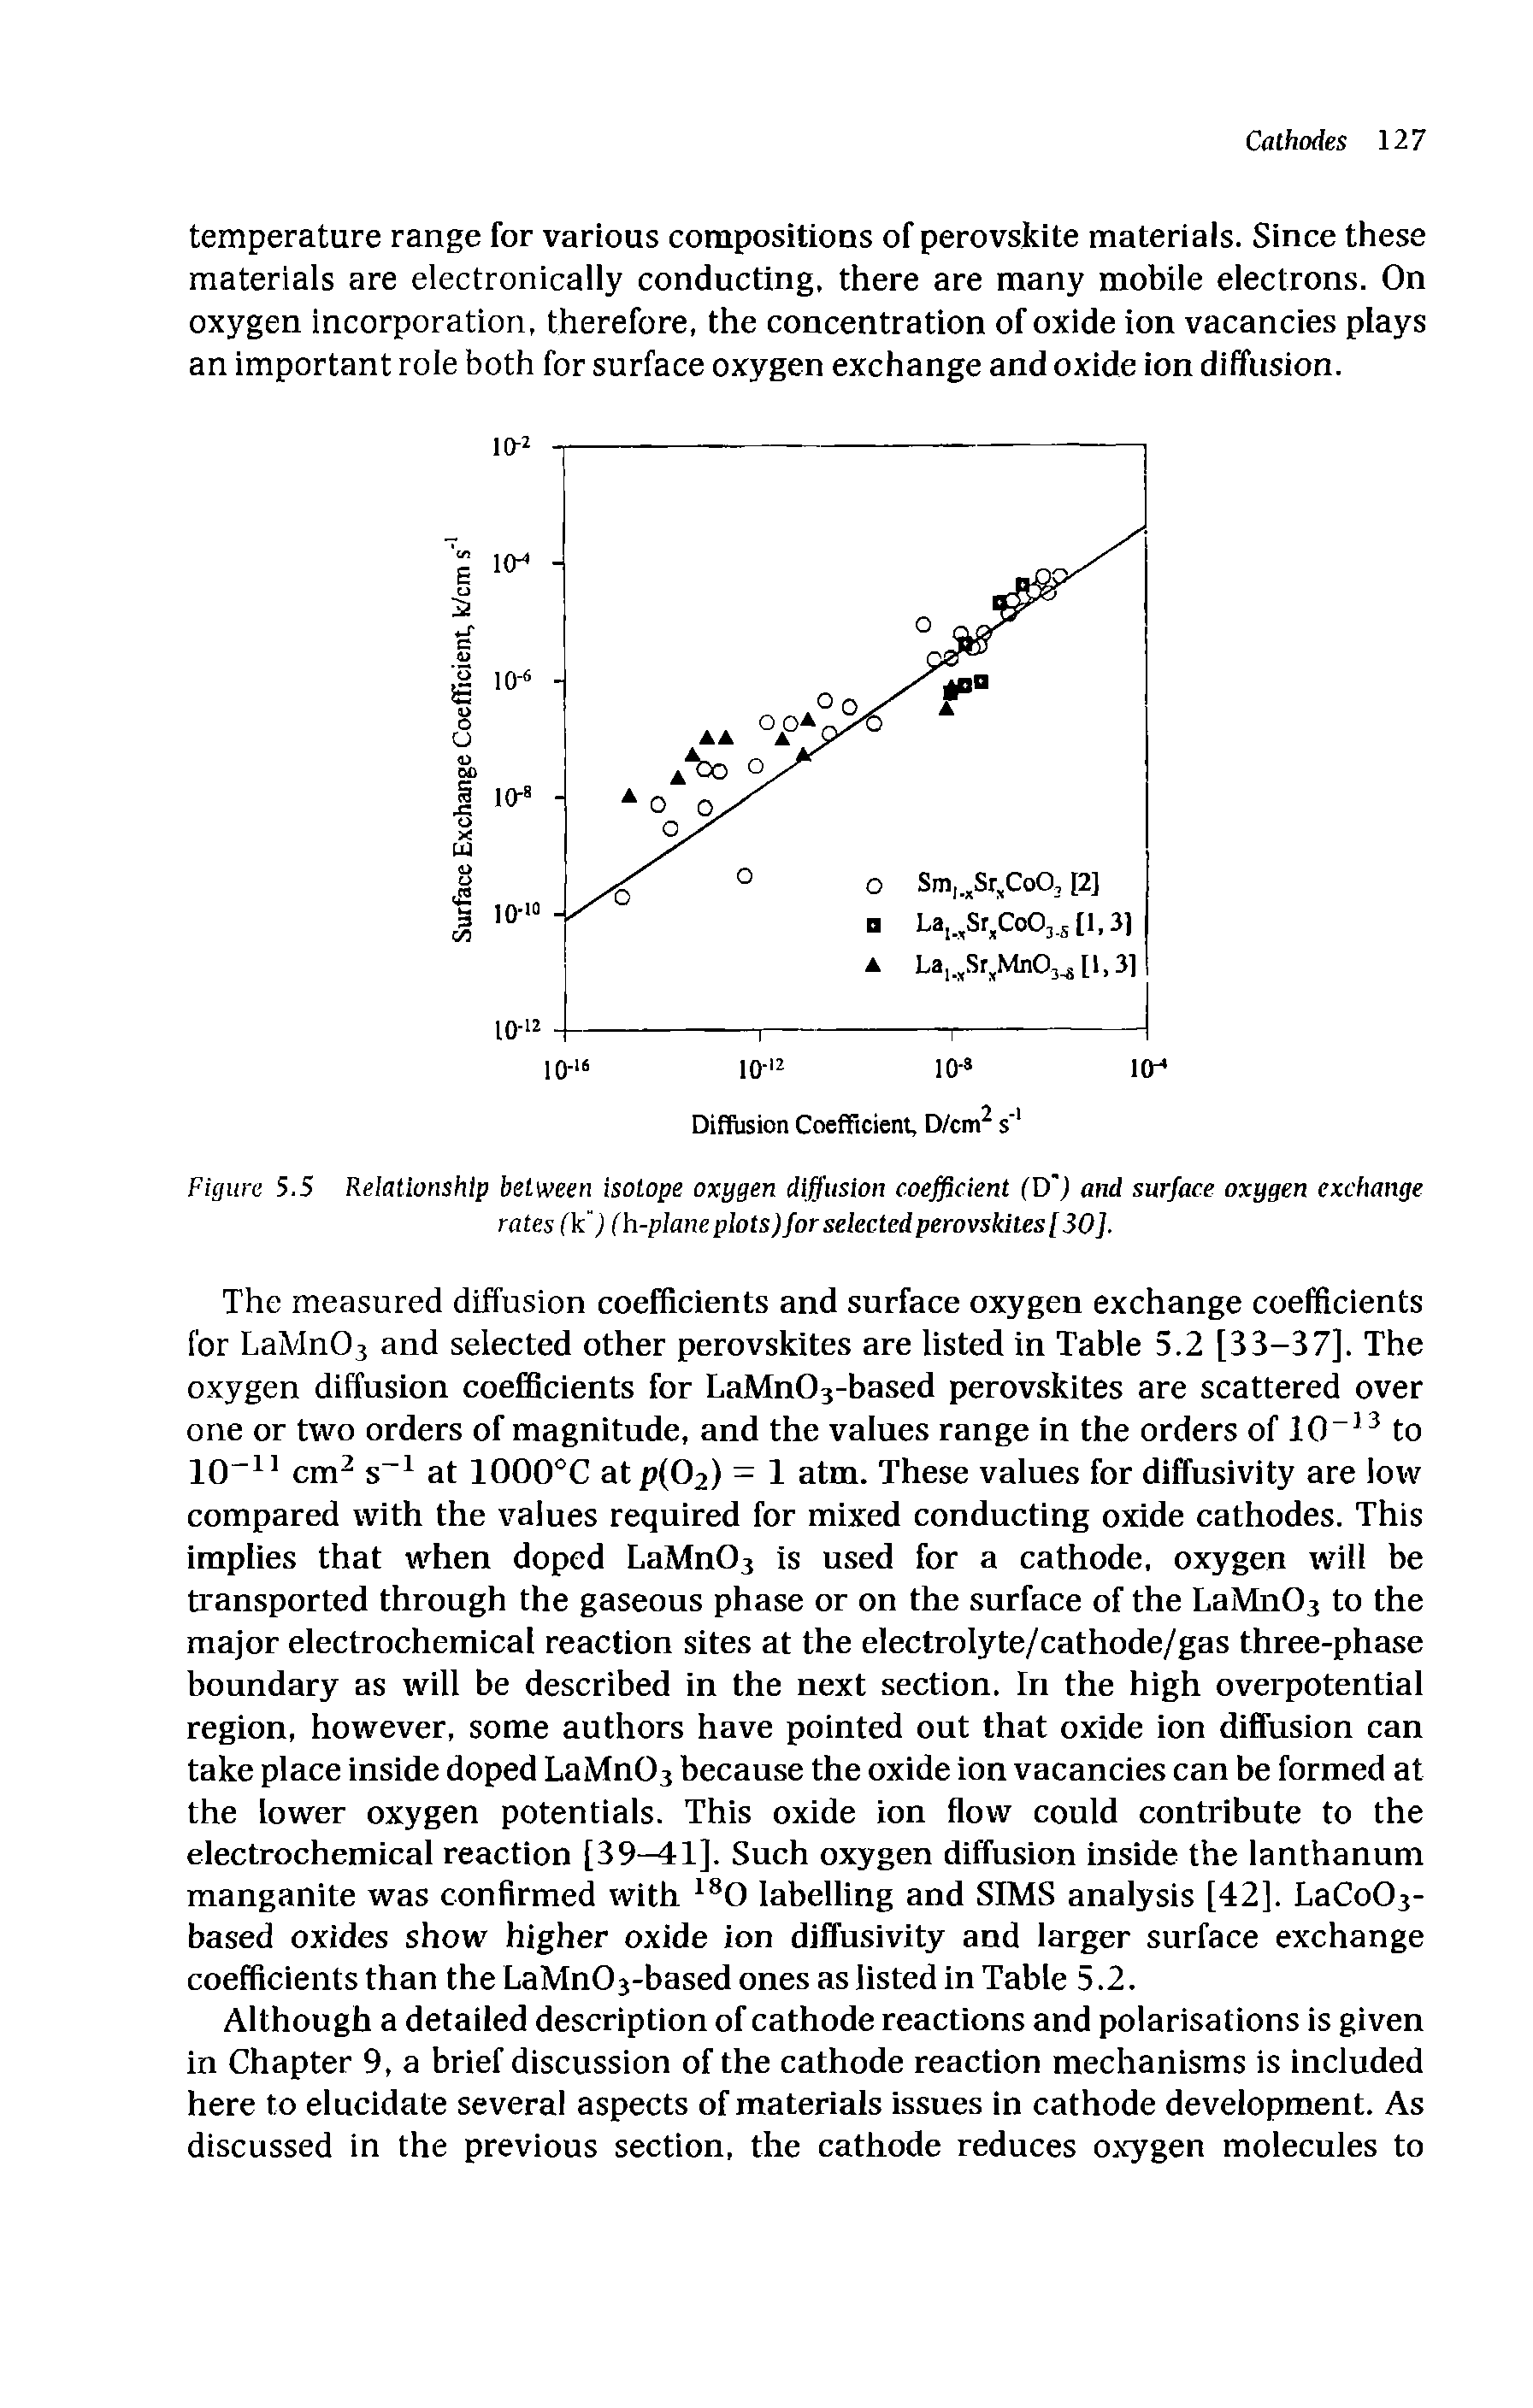 Figure 5.5 Relationship between isotope oxygen diffusion coefficient (D J and surface oxygen exchange rates Ck") (h-planeplots)forselectedperovskites[SO].